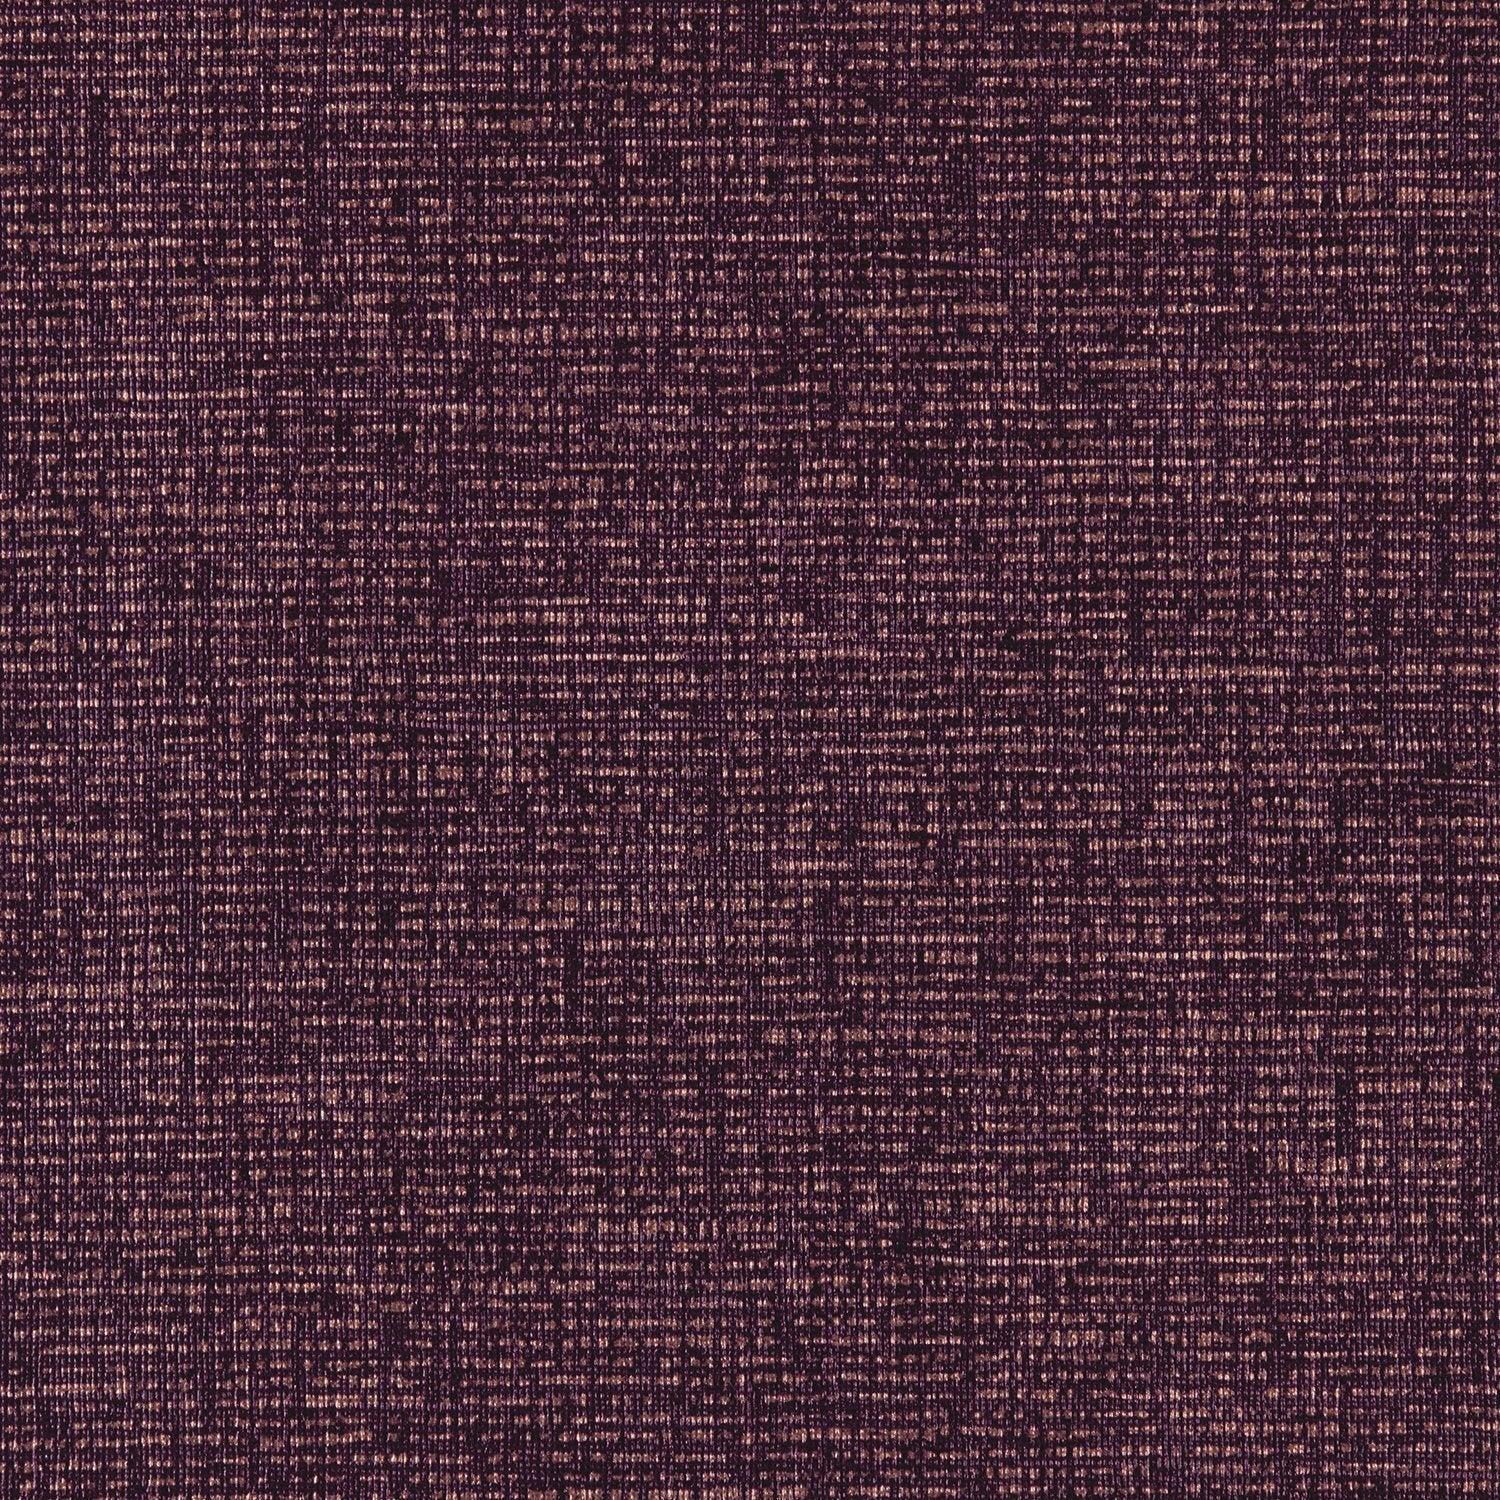 Spectrum - Y46928 - Wallcovering - Vycon - Kube Contract